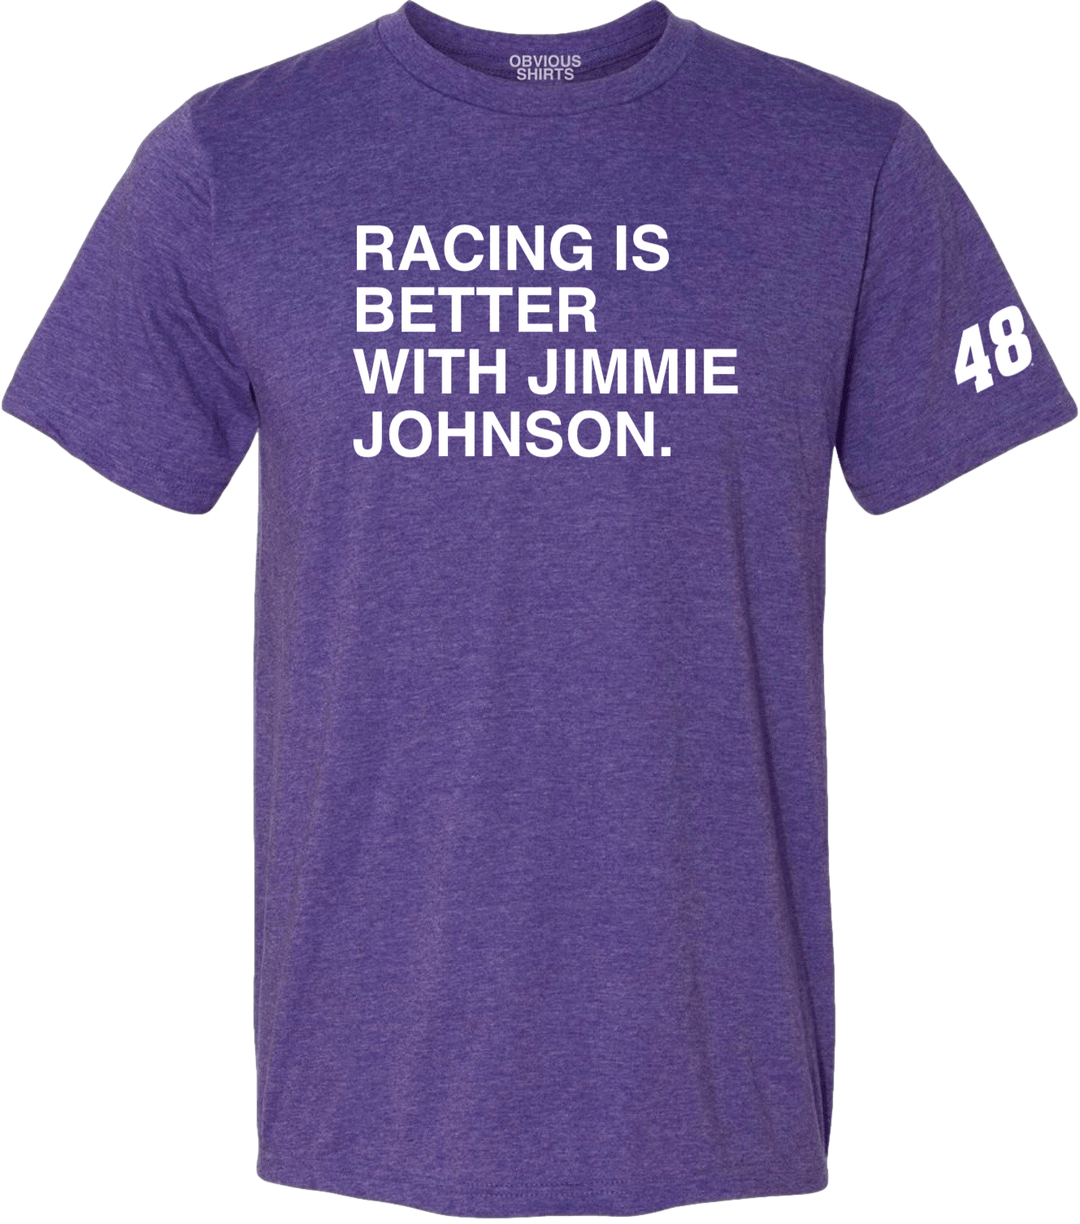 RACING IS BETTER WITH JIMMIE JOHNSON. - OBVIOUS SHIRTS